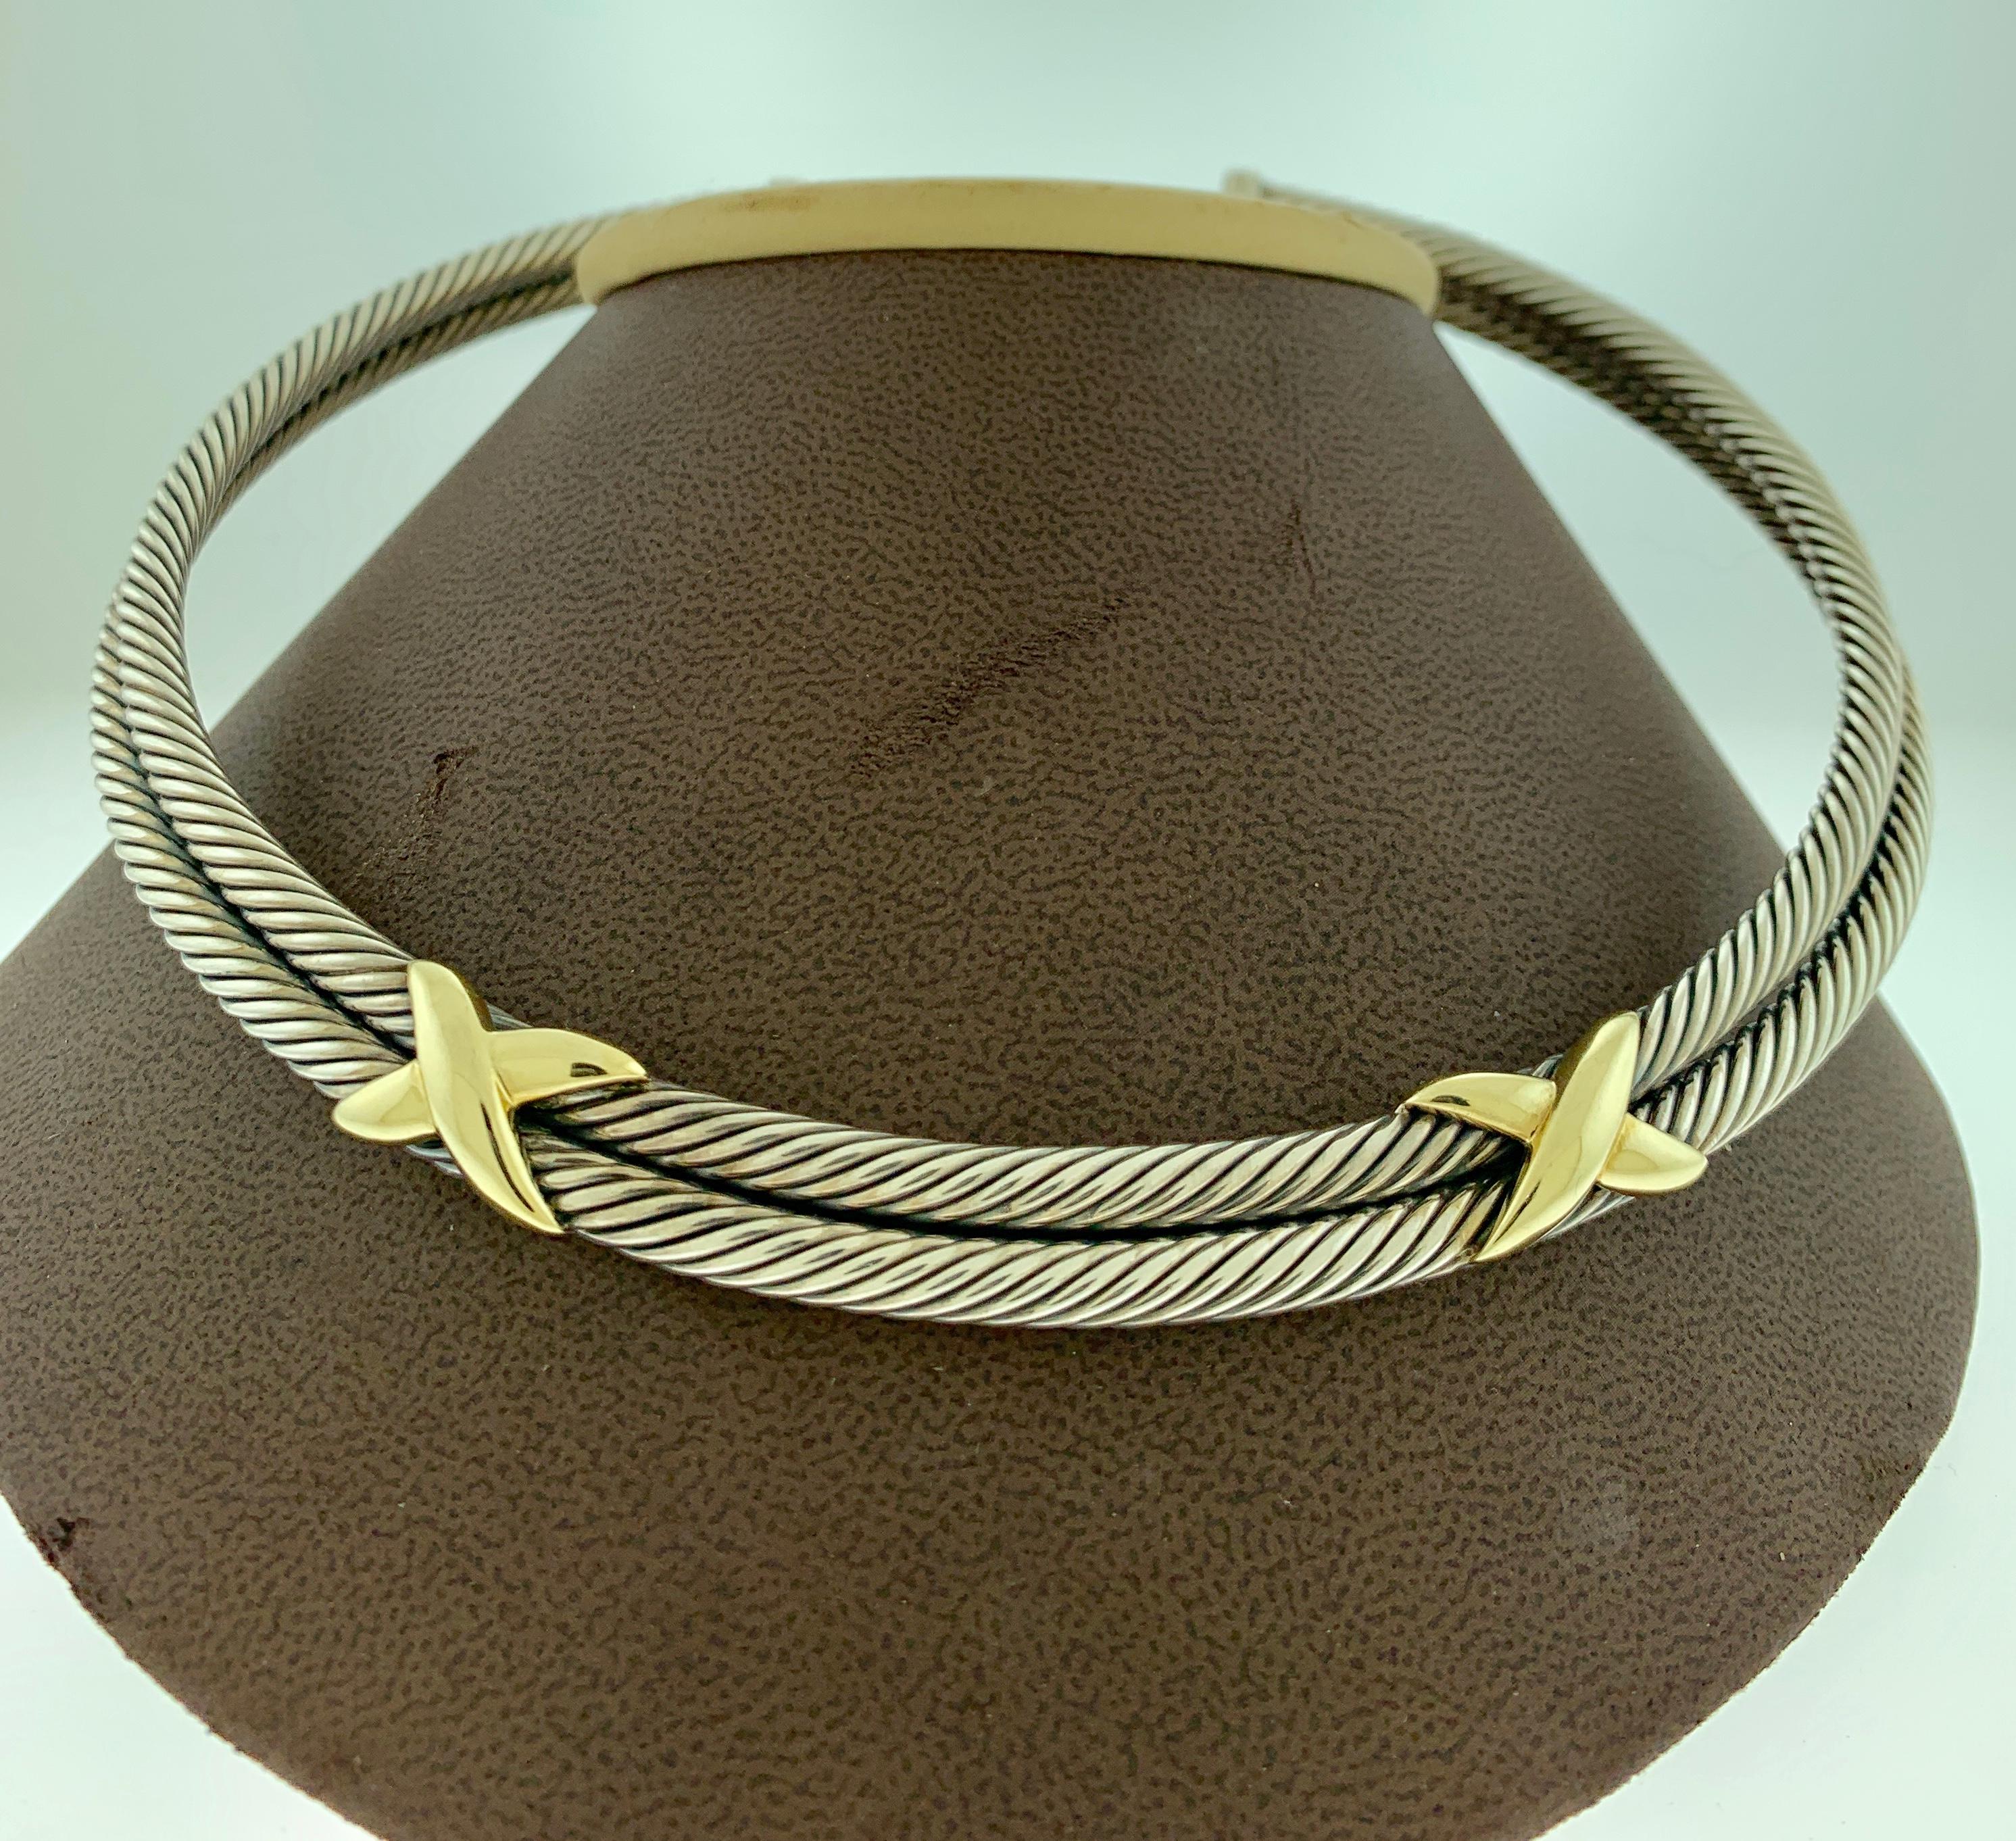  Stunning 
$ 1800 Value
David Yurman Classic  X double Cable Choker Necklace
Two  14K Gold   X 
925 , Sterling  Silver
Color: Gold/Silver
Weight 95 gm
Stamped Hallmarks: David Yurman , 14 K 925
fits medium  to large neck size 
Please look at all the